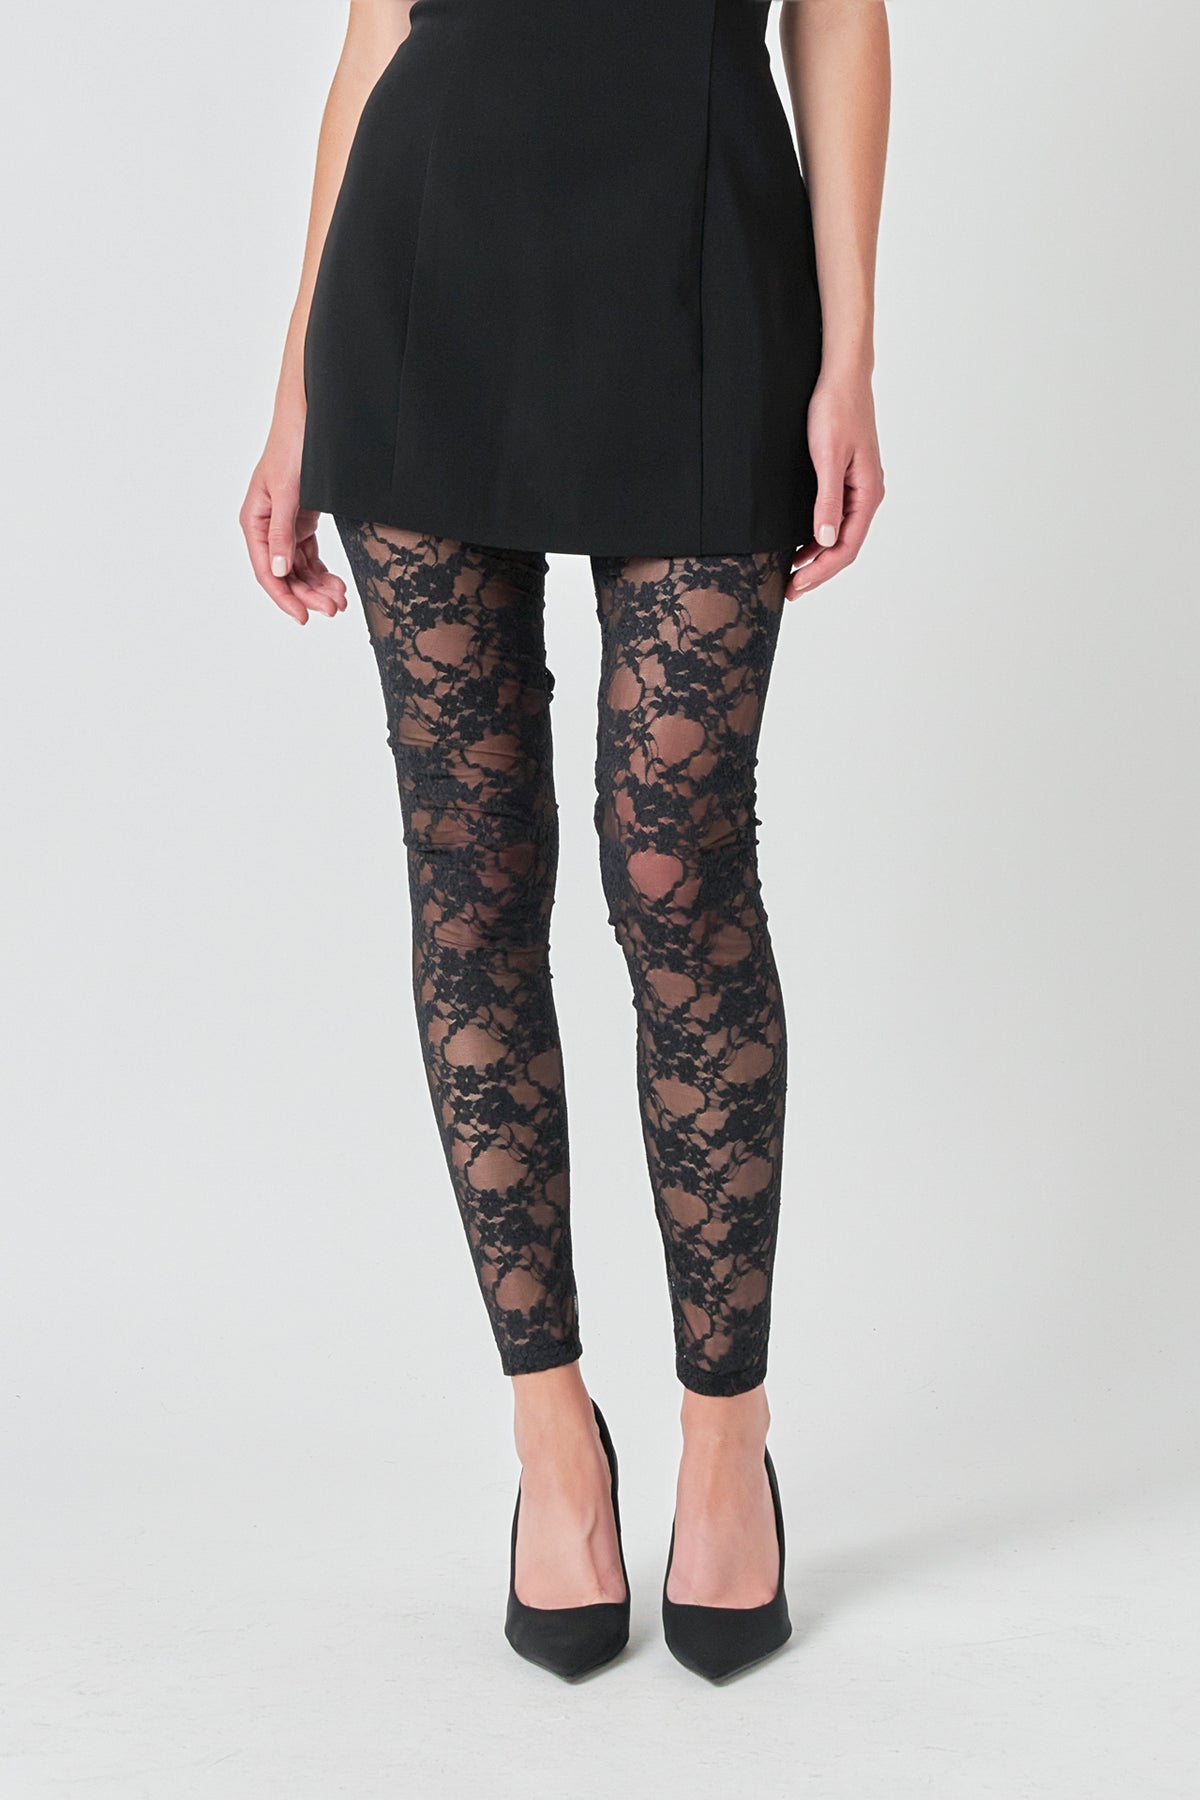 ENDLESS ROSE - Floral Lace Leggings - PANTS available at Objectrare